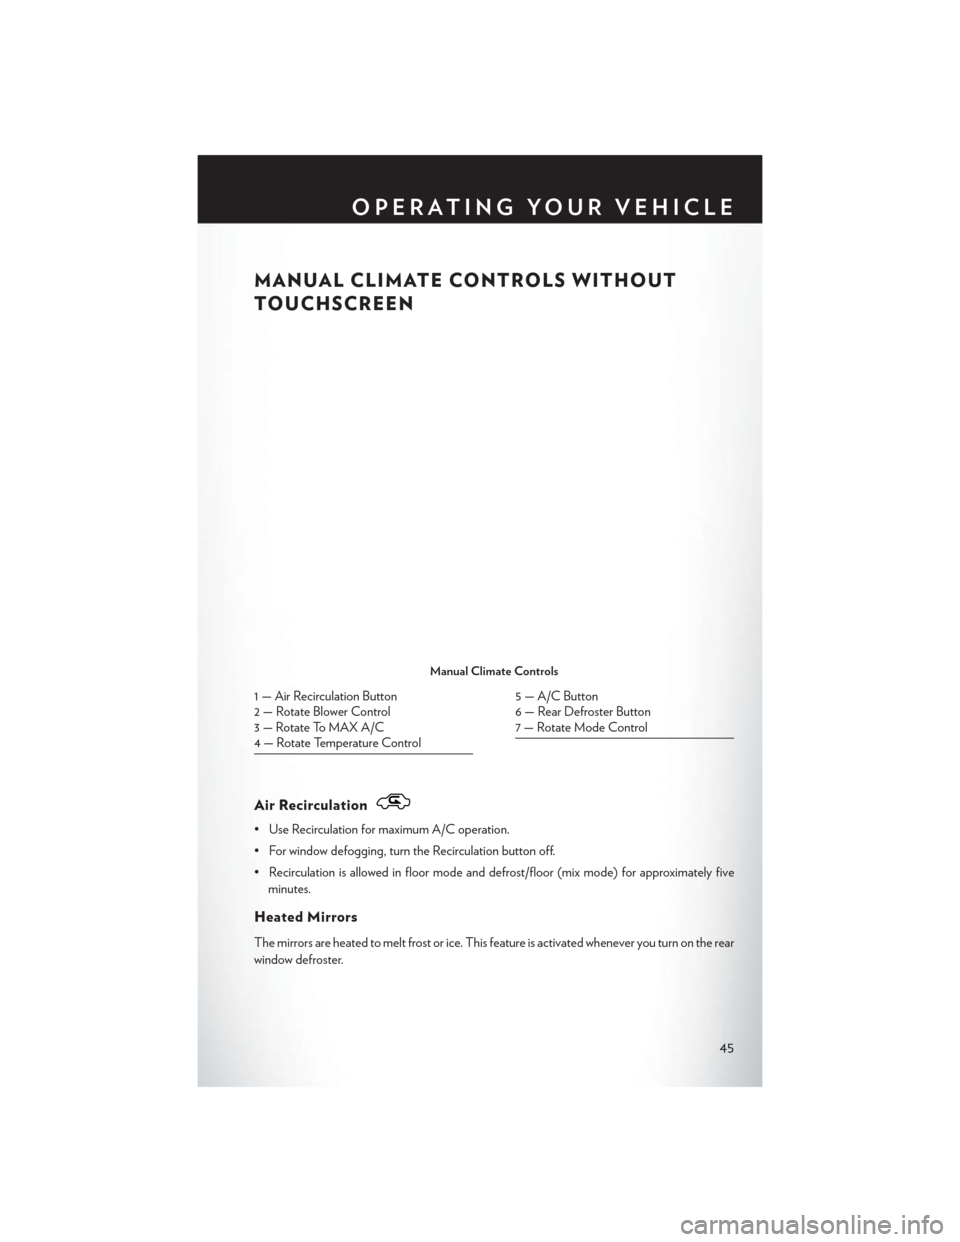 CHRYSLER 200 2015 2.G Service Manual MANUAL CLIMATE CONTROLS WITHOUT
TOUCHSCREEN
Air Recirculation
• Use Recirculation for maximum A/C operation.
• For window defogging, turn the Recirculation button off.
• Recirculation is allowed